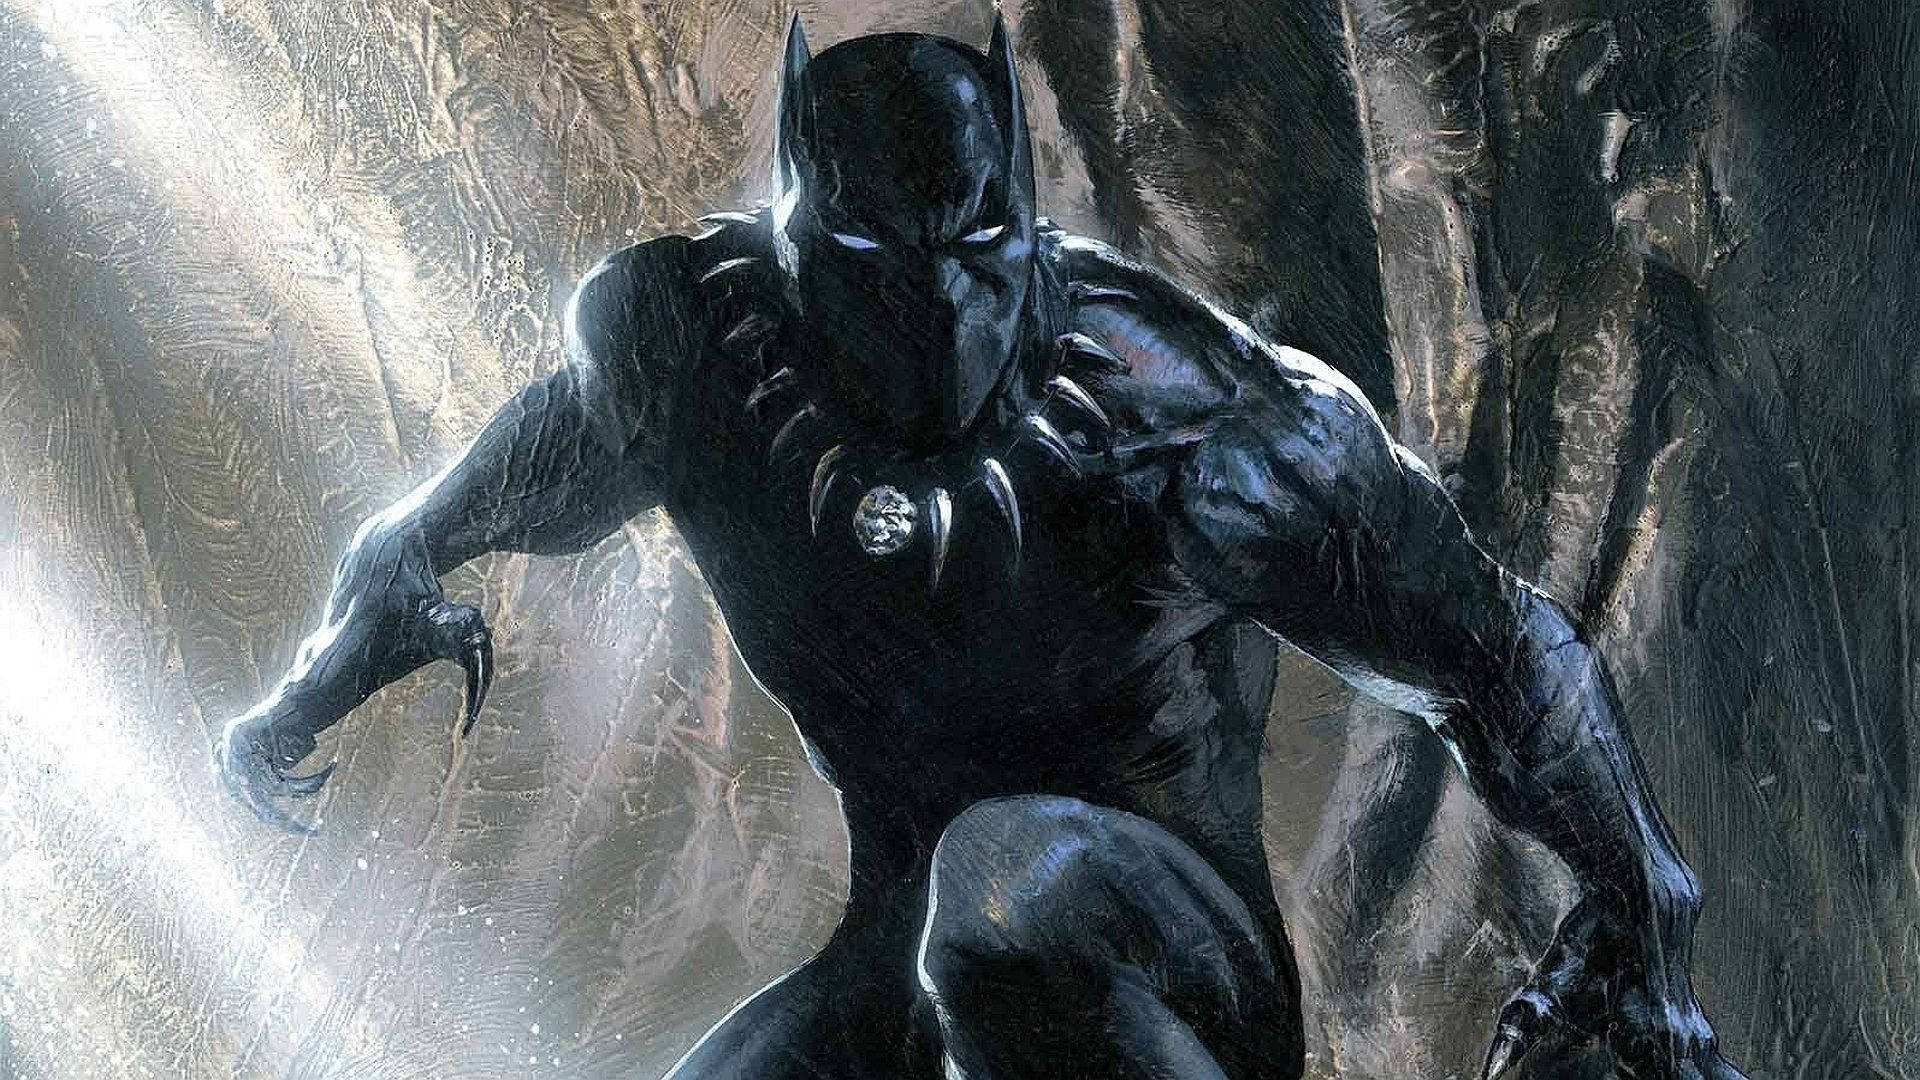 Join the Wakanda revolution with Black Panther Wallpaper